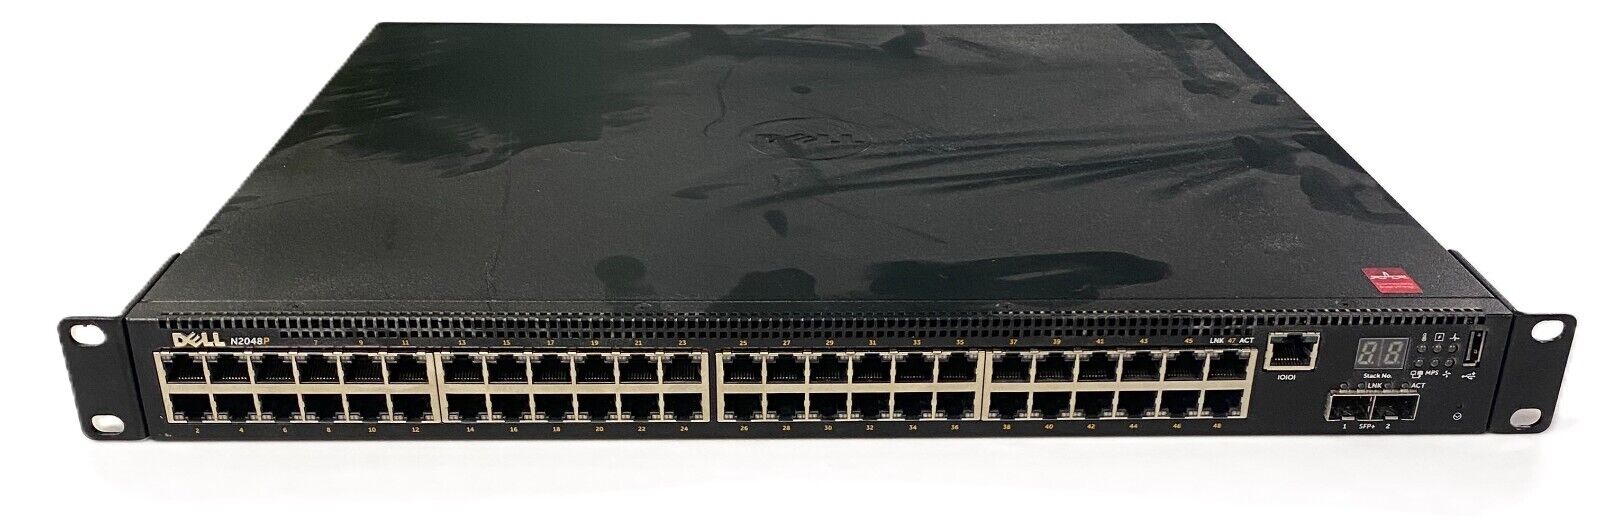 Dell N2048P L2 PoE+ Networking Switch